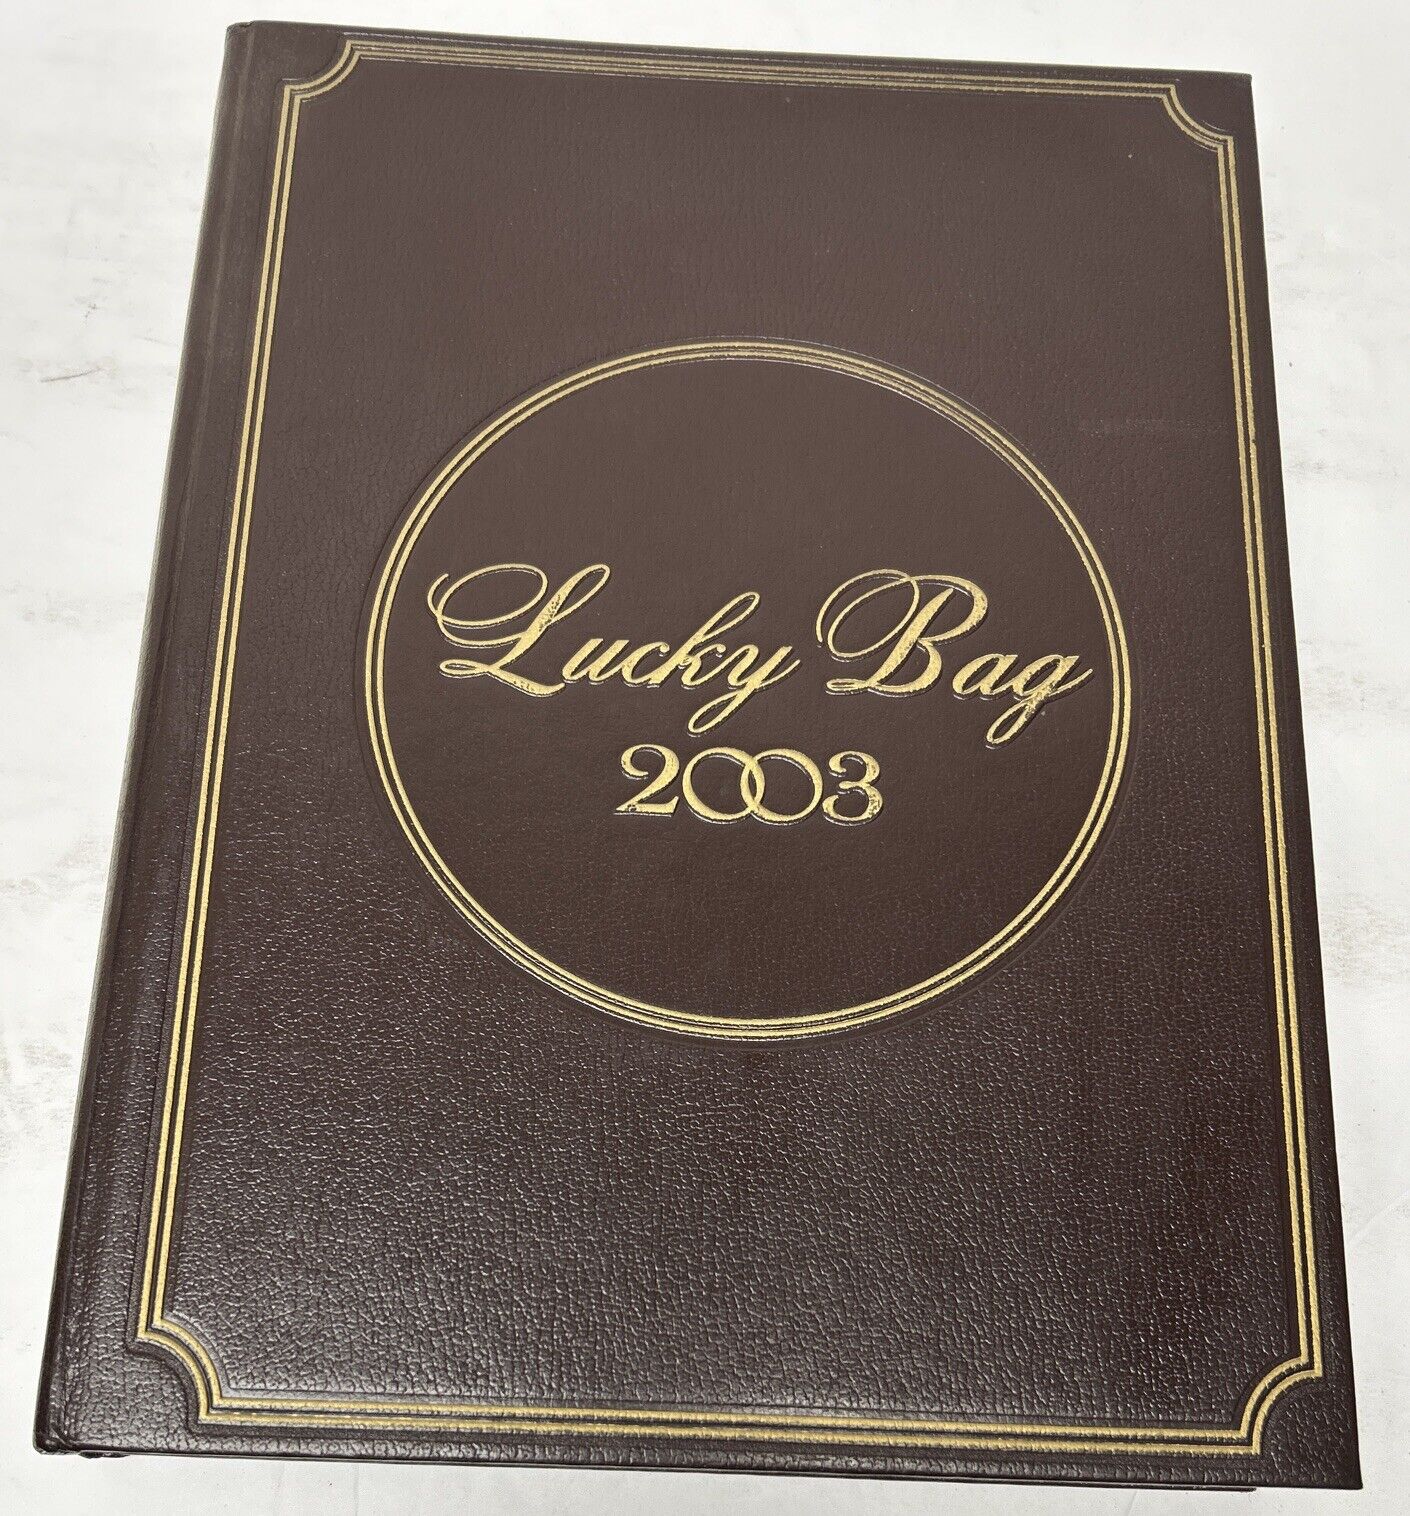 The Lucky Bag of 2003 United States Naval Academy Annapolis, MD Yearbook